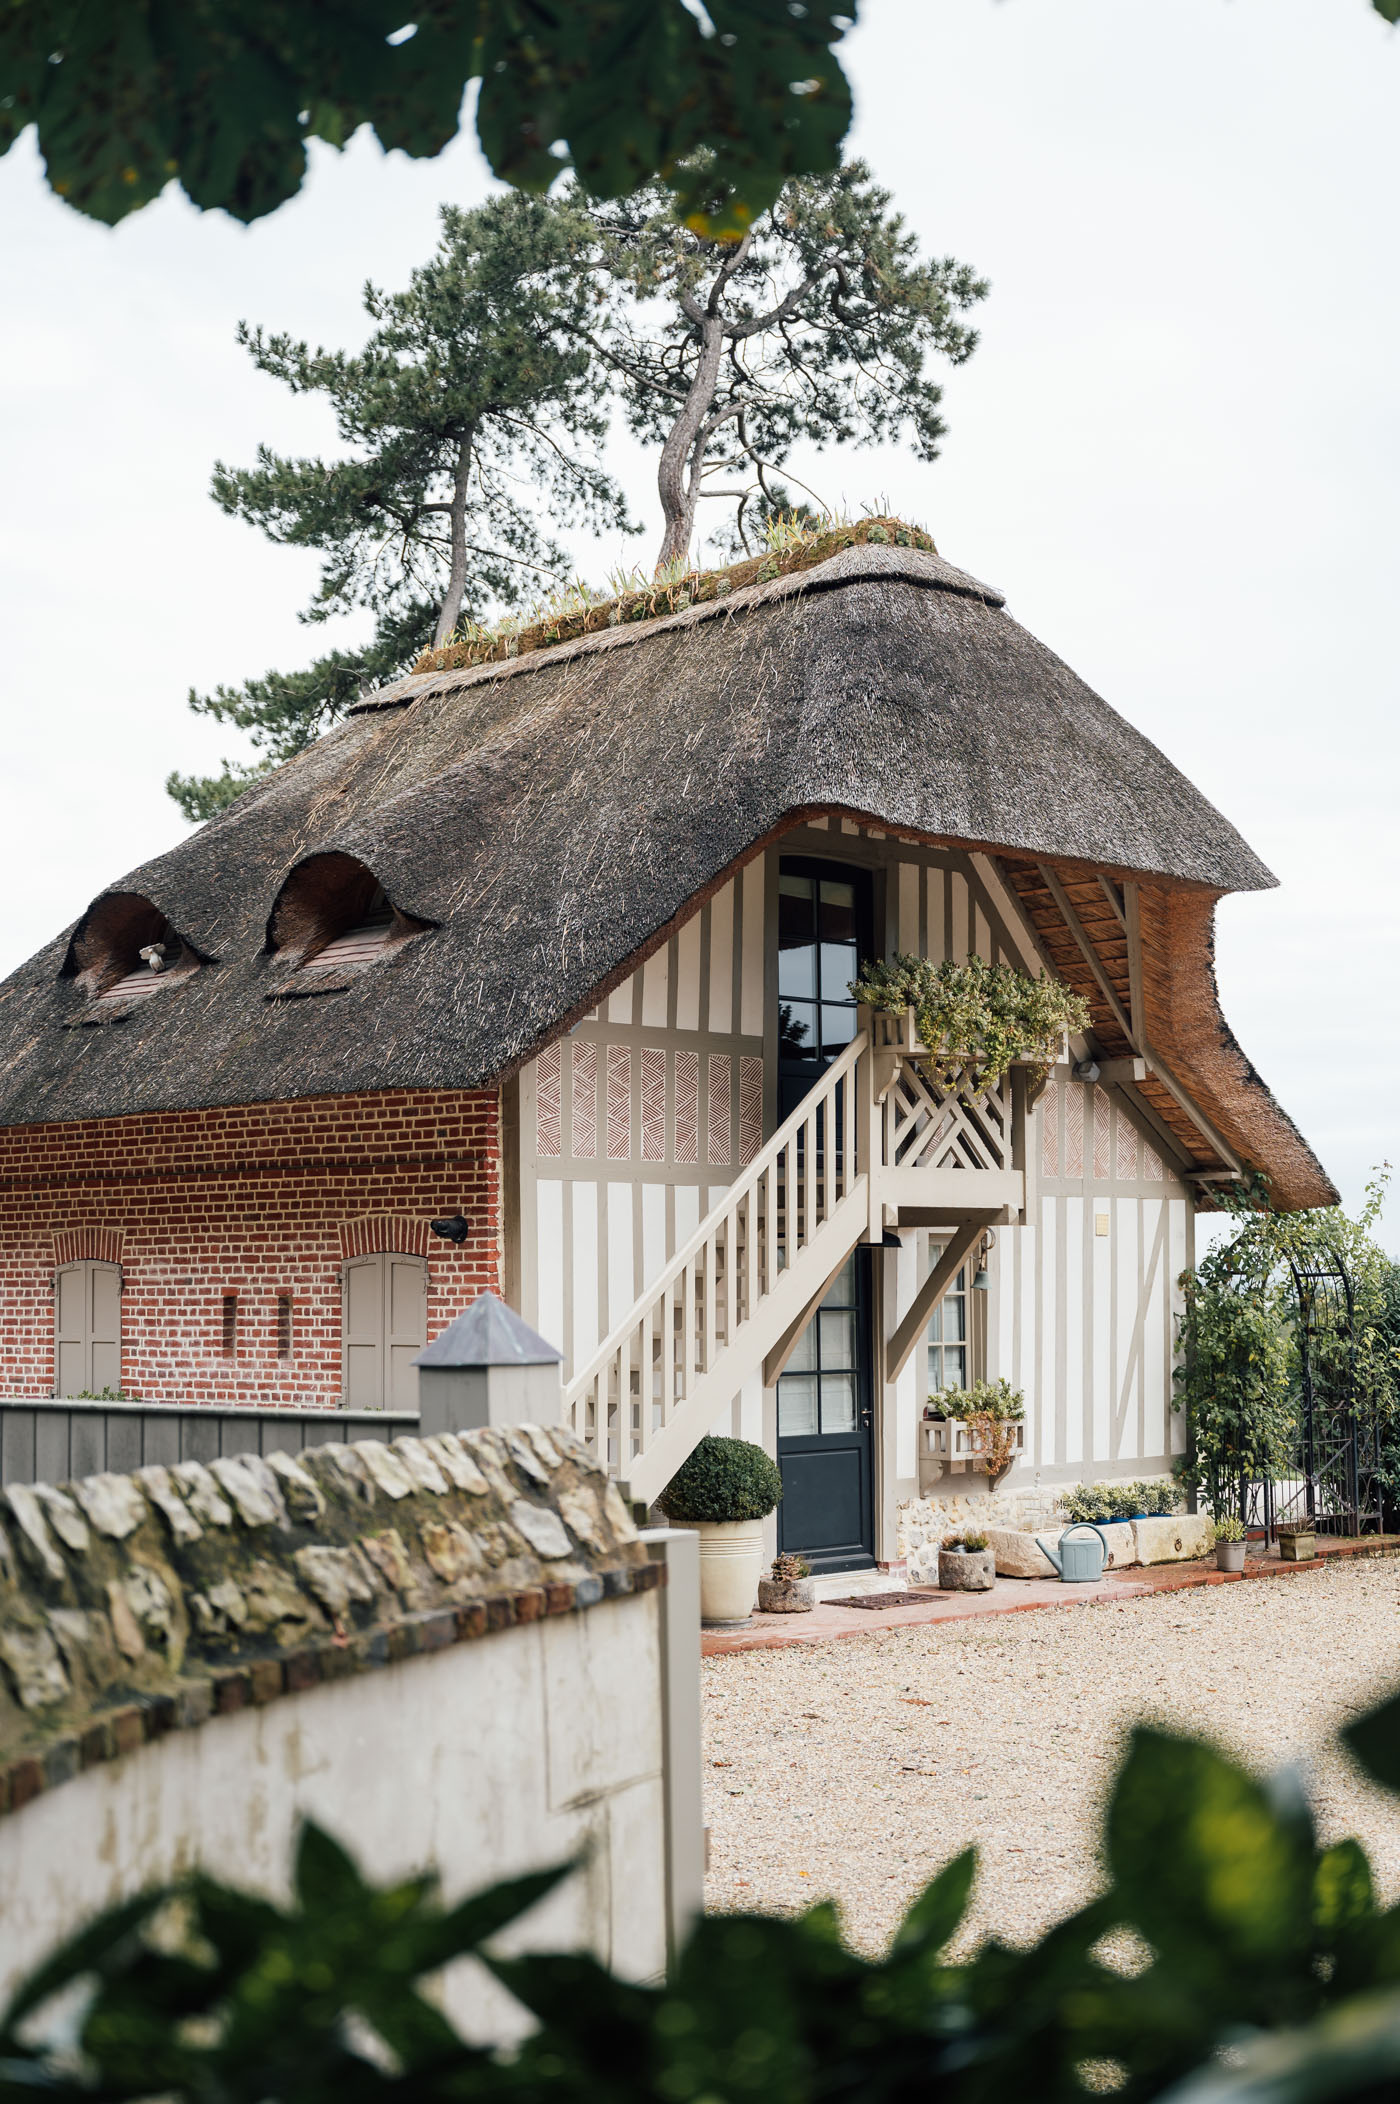 Thatched house near Honfleur Normandy